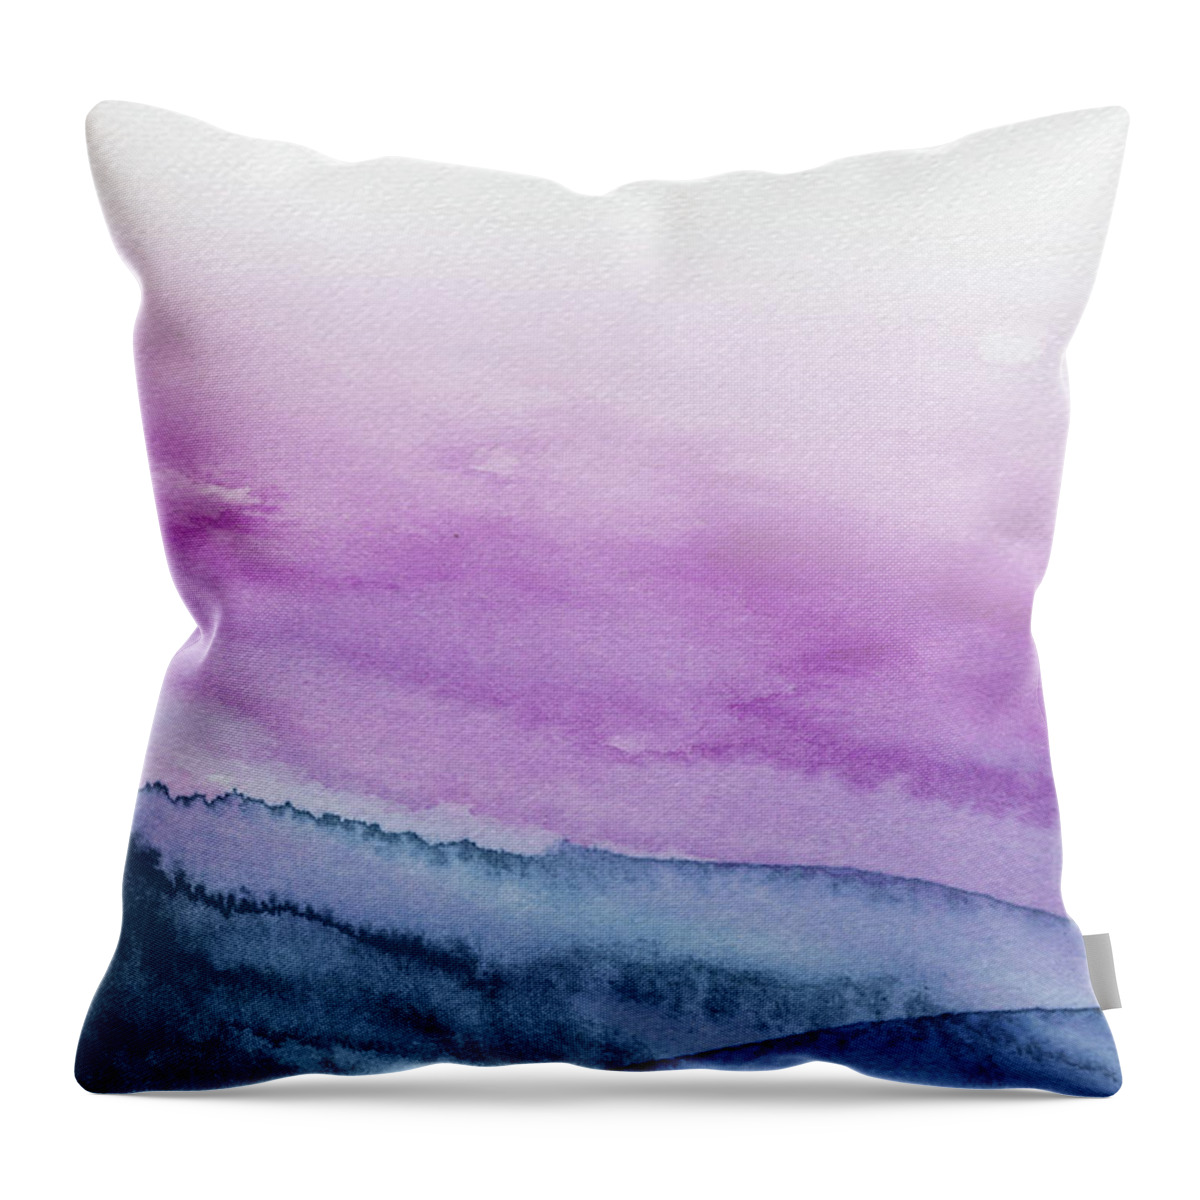 Landscape Throw Pillow featuring the painting Blue and Purple Mountains by Naxart Studio